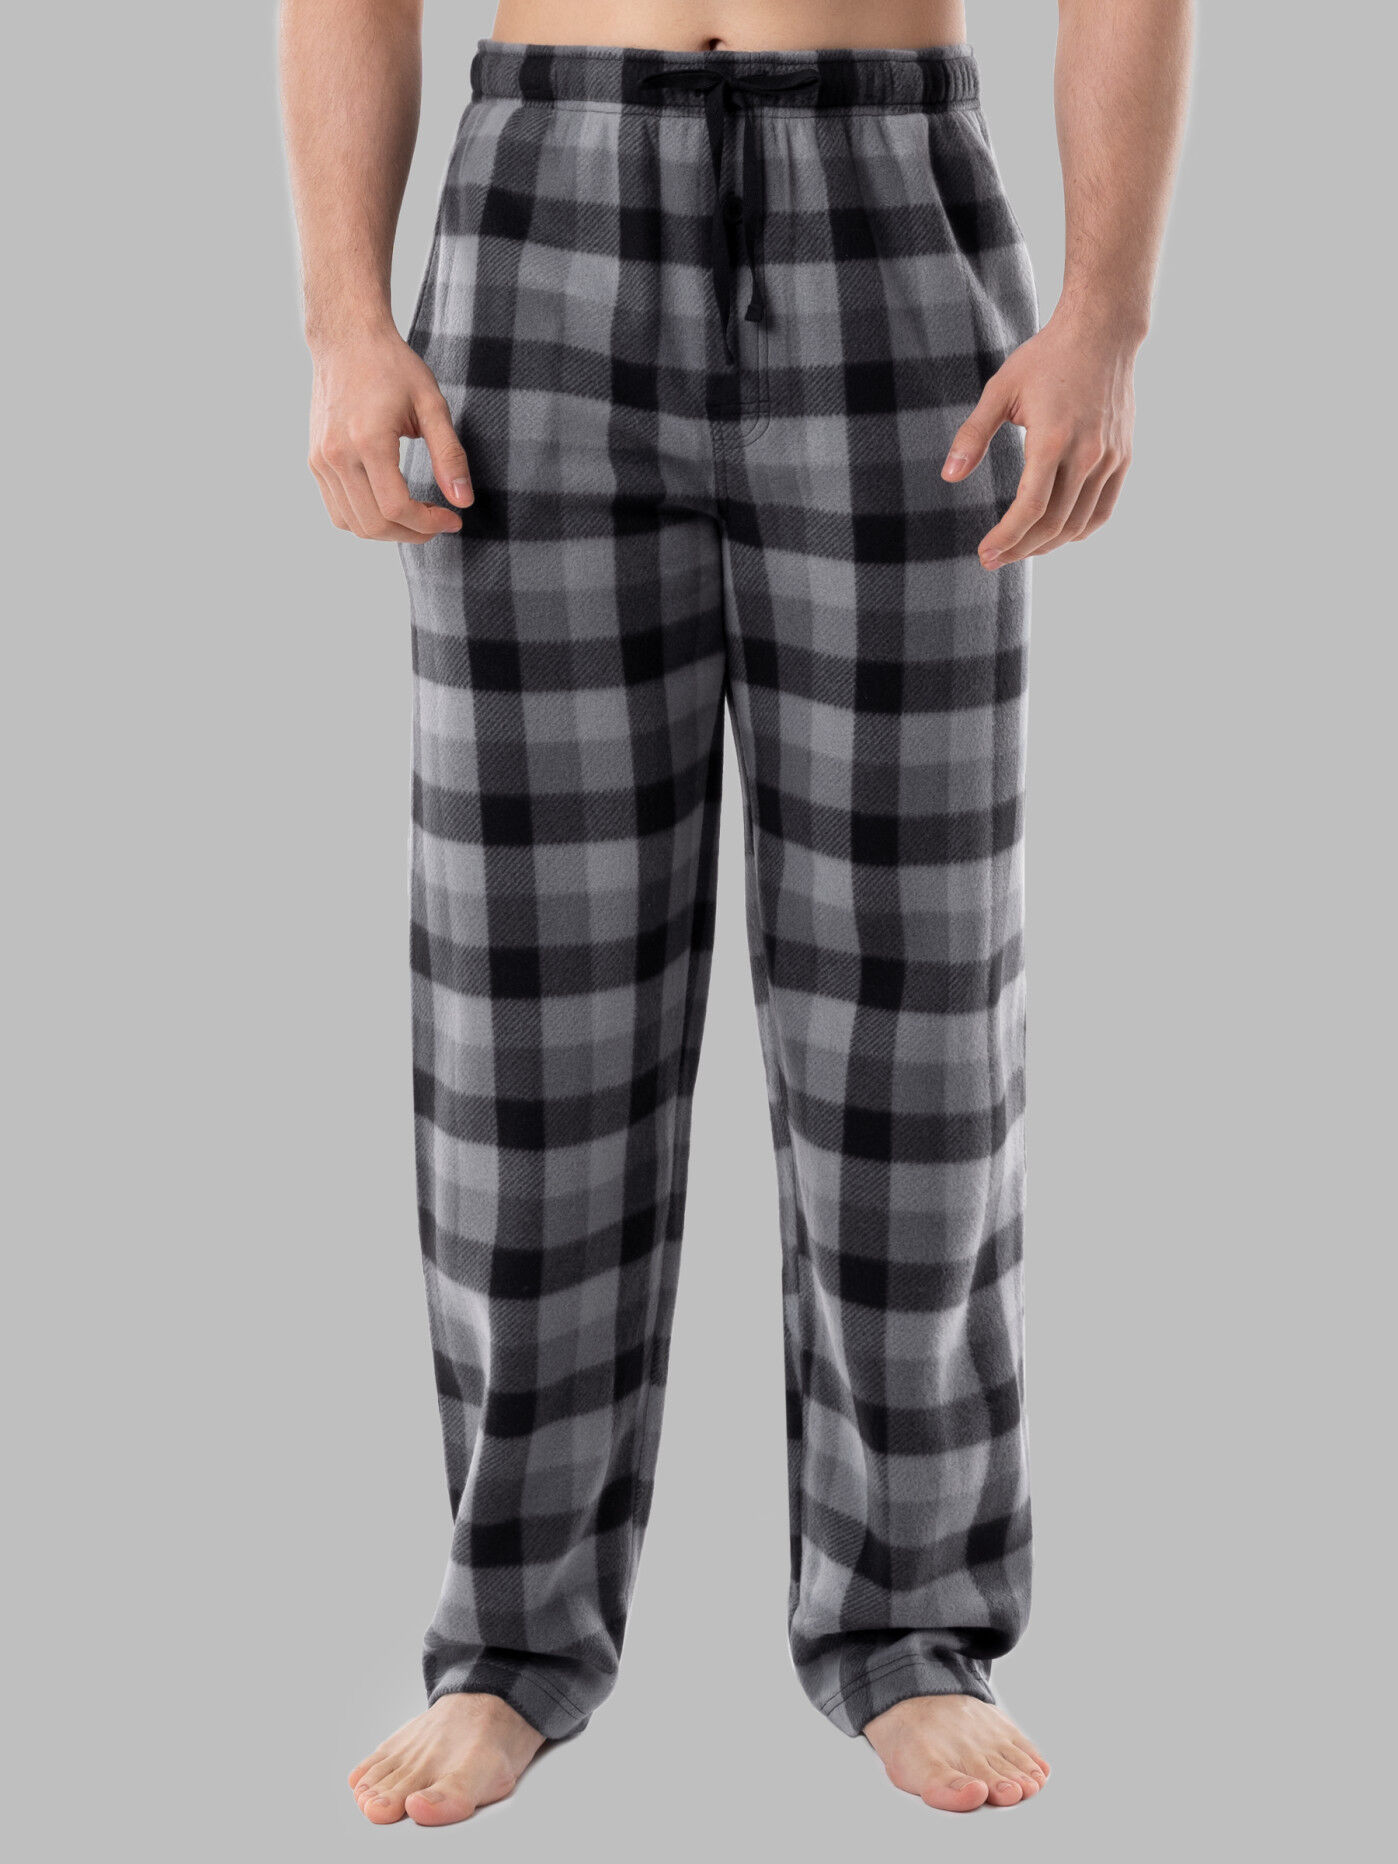 No Fade Simple And Stylish Look Casual Wear Blue Check Cotton Pajamas For  Men at Best Price in Tirupur | Agatheesh Trends